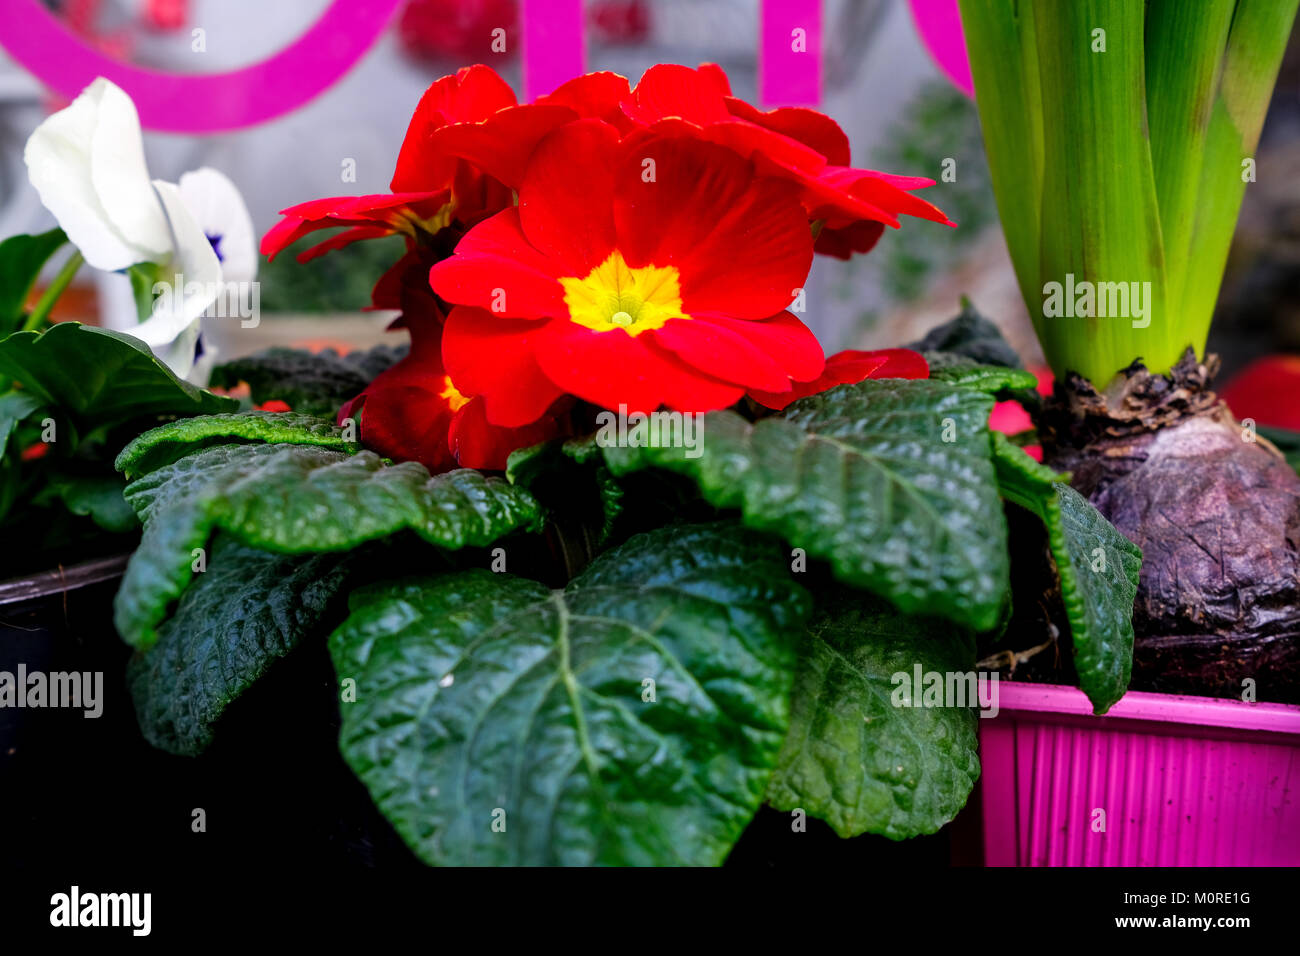 pansy flowers in a shop Stock Photo